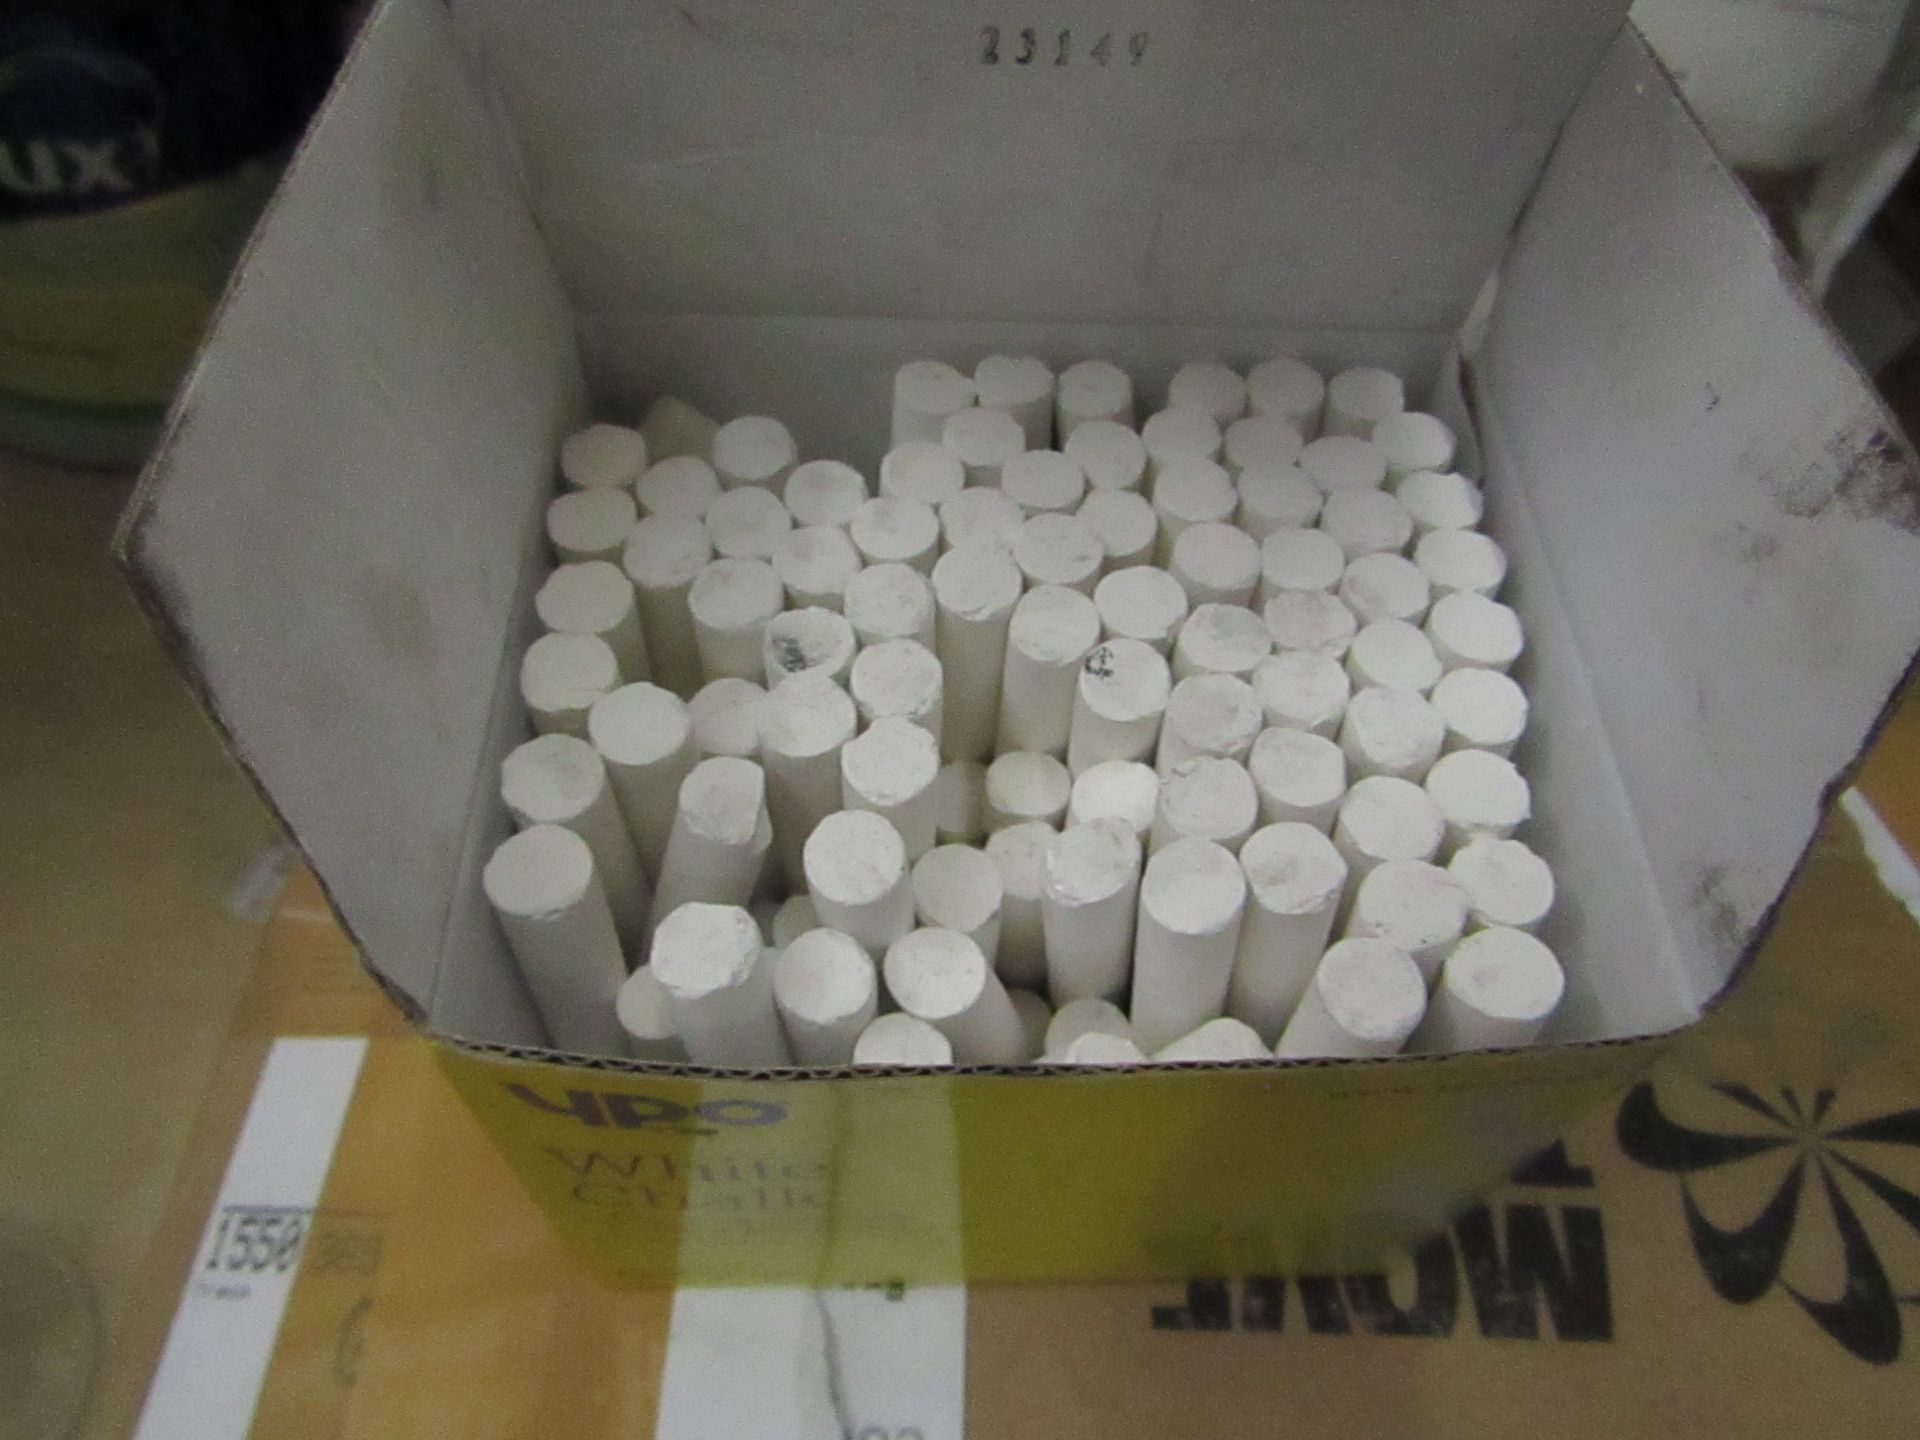 YPO - White Chalk (Box of 100) - Unchecked & Boxed.